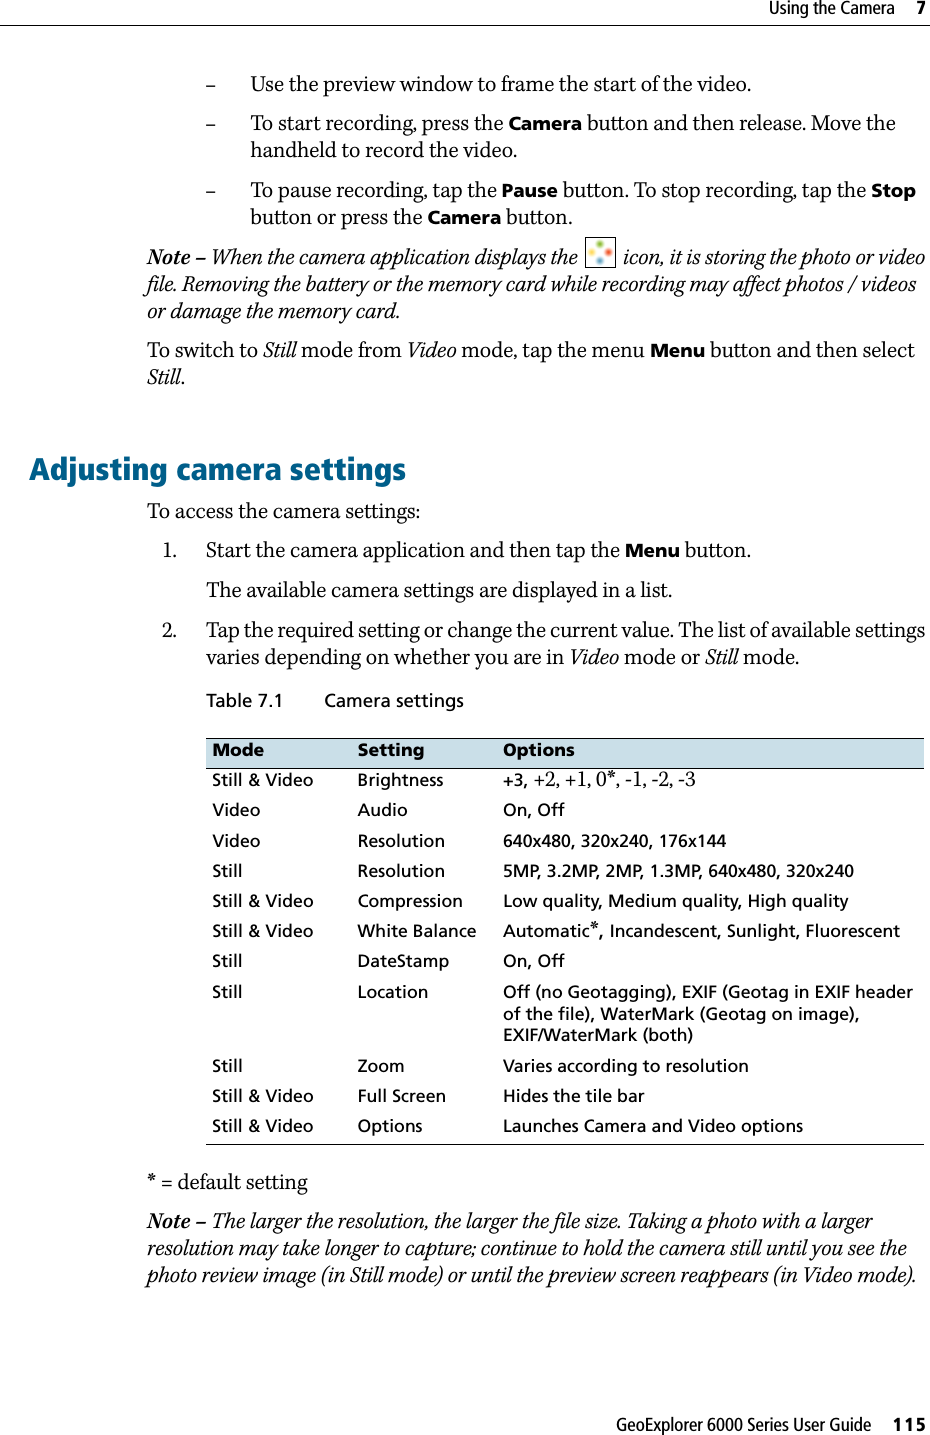 GeoExplorer 6000 Series User Guide     115Using the Camera     7–Use the preview window to frame the start of the video.–To start recording, press the Camera button and then release. Move the handheld to record the video.–To pause recording, tap the Pause button. To stop recording, tap the Stop button or press the Camera button.Note – When the camera application displays the   icon, it is storing the photo or video file. Removing the battery or the memory card while recording may affect photos / videos or damage the memory card.To switch to Still mode from Video mode, tap the menu Menu button and then select Still.Adjusting camera settingsTo access the camera settings:1. Start the camera application and then tap the Menu button.The available camera settings are displayed in a list. 2. Tap the required setting or change the current value. The list of available settings varies depending on whether you are in Video mode or Still mode.Table 7.1 Camera settings* = default settingNote – The larger the resolution, the larger the file size. Taking a photo with a larger resolution may take longer to capture; continue to hold the camera still until you see the photo review image (in Still mode) or until the preview screen reappears (in Video mode).Mode Setting OptionsStill &amp; Video Brightness +3, +2, +1, 0*, -1, -2, -3Video Audio On, OffVideo Resolution 640x480, 320x240, 176x144Still Resolution 5MP, 3.2MP, 2MP, 1.3MP, 640x480, 320x240Still &amp; Video Compression Low quality, Medium quality, High qualityStill &amp; Video White Balance Automatic*, Incandescent, Sunlight, FluorescentStill DateStamp On, OffStill Location Off (no Geotagging), EXIF (Geotag in EXIF header of the file), WaterMark (Geotag on image), EXIF/WaterMark (both)Still Zoom Varies according to resolutionStill &amp; Video Full Screen Hides the tile barStill &amp; Video Options Launches Camera and Video options